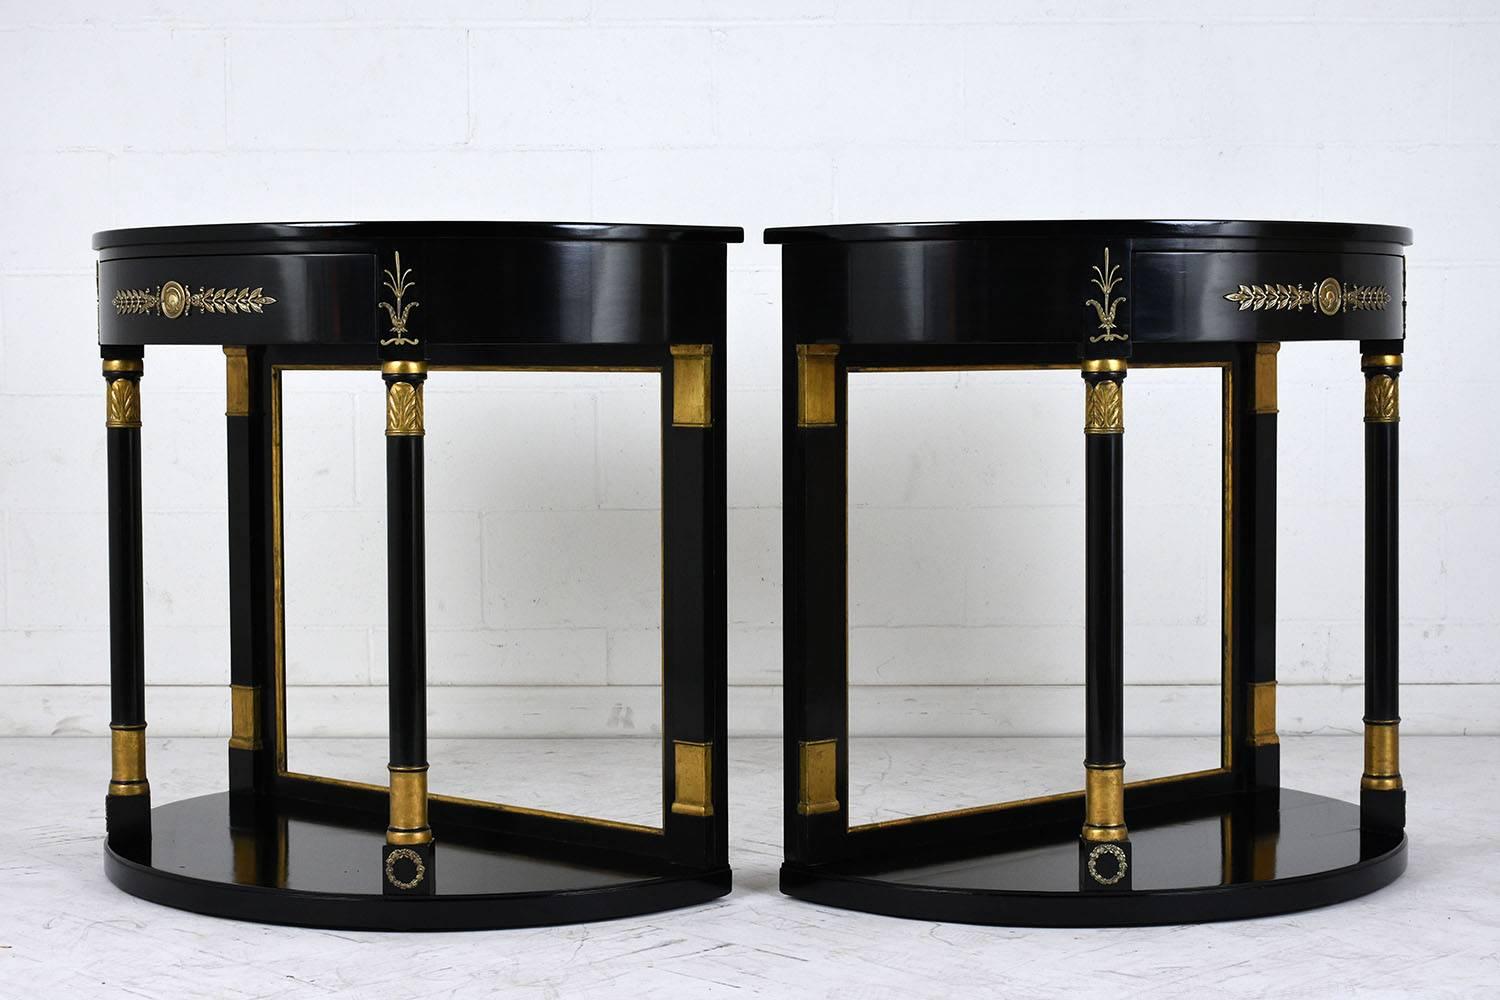 This pair of 1950s Empire-style demi-lune console tables are made of wood that has been ebonized with a lacquered finish. The console tables have a single drawer that opens from the bottom edge and is adorned with ornate brass accents. Below the